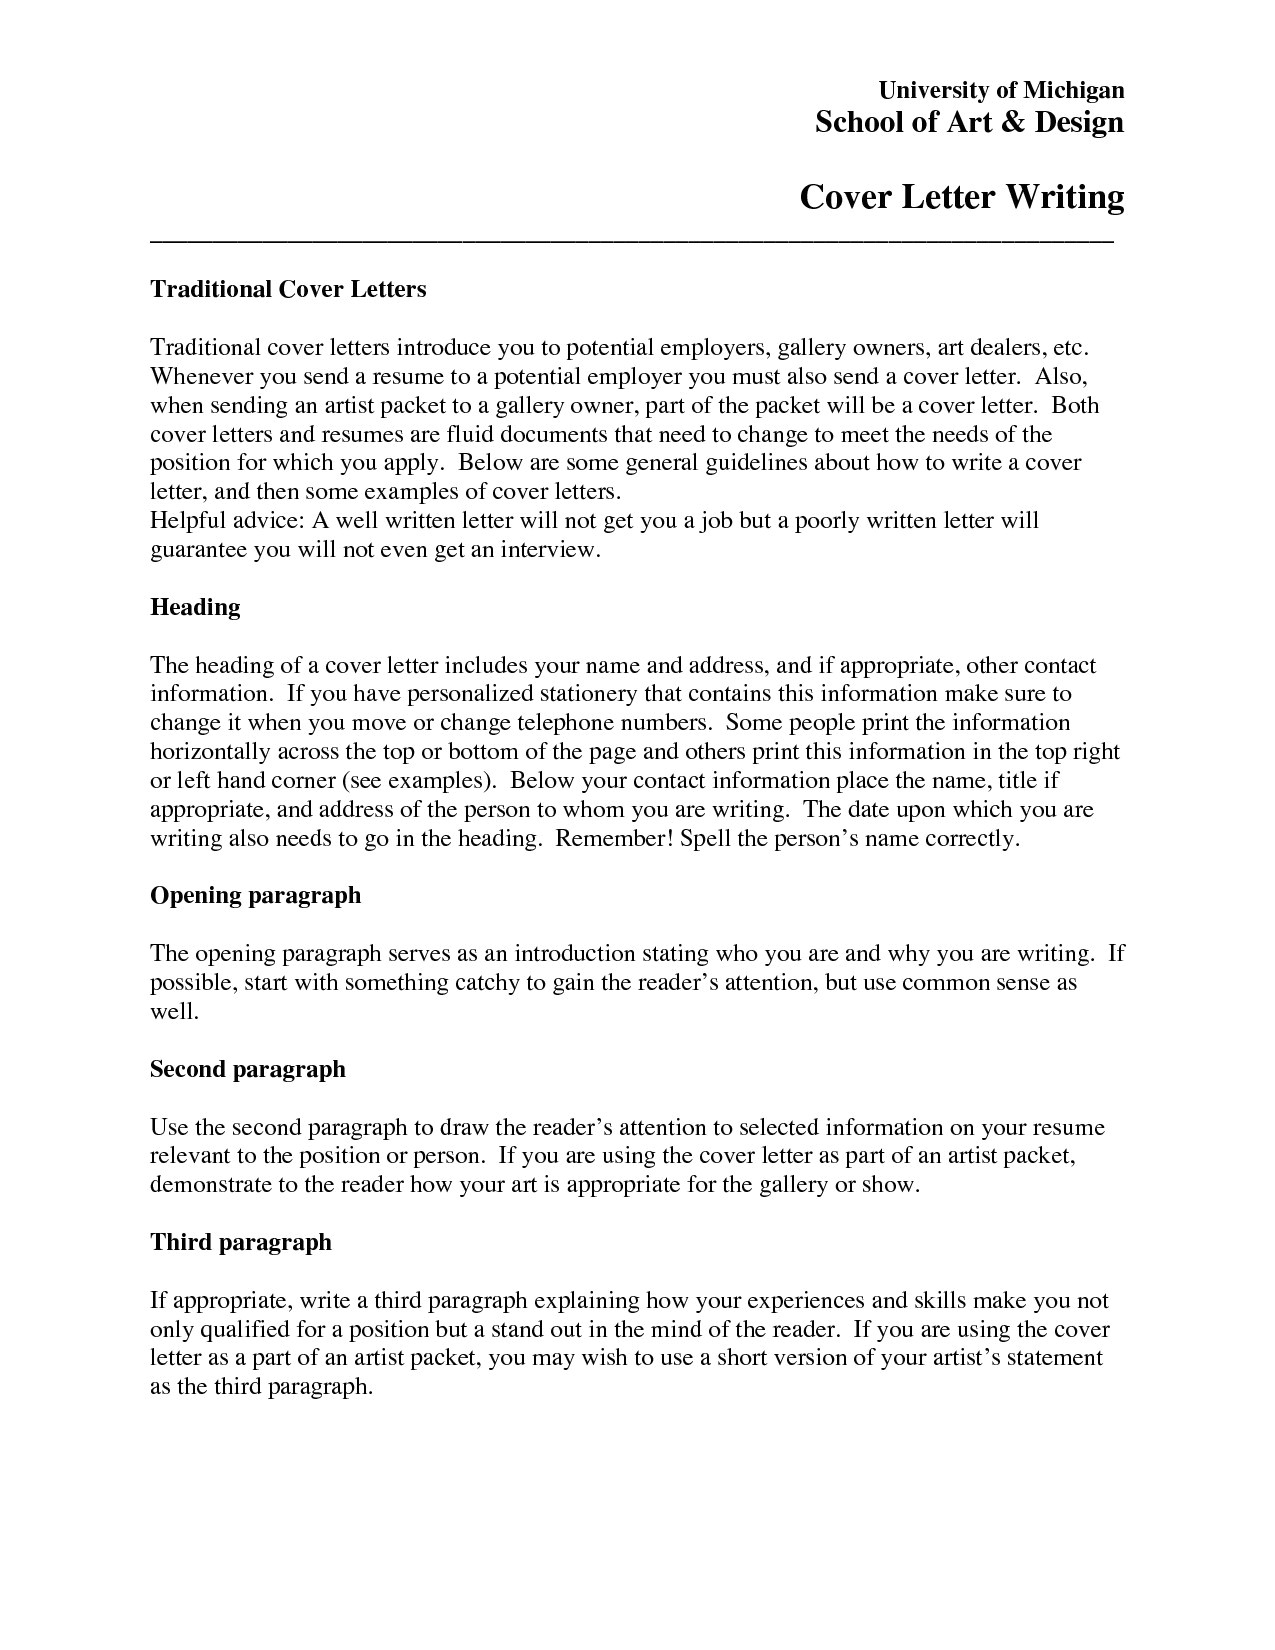 Artist Cover Letter to Gallery Sample Cover Letter for Art Gallery the Letter Sample